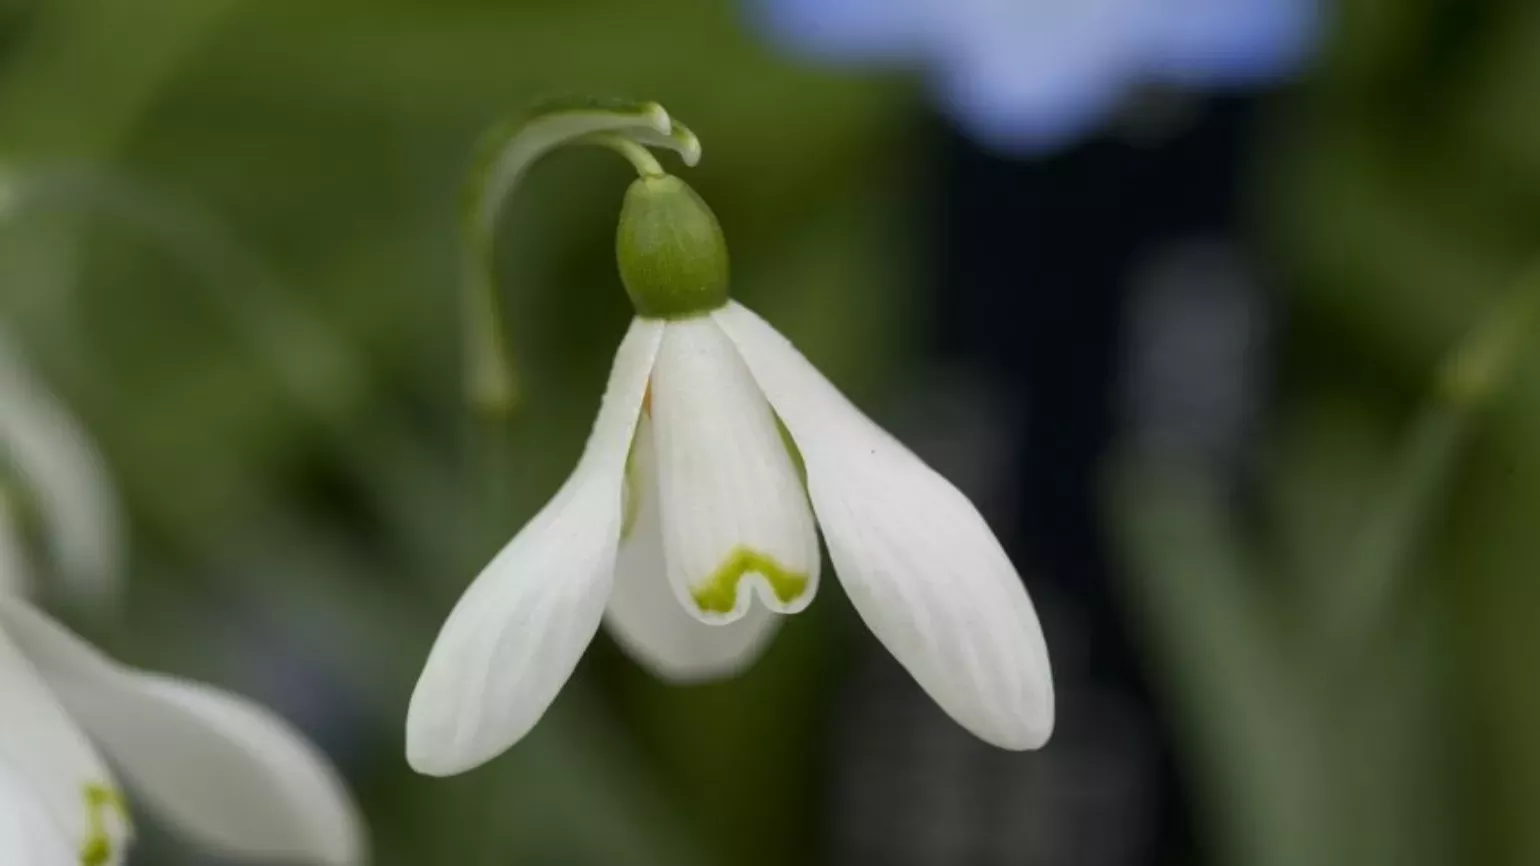 Nodding, white flowers of the commin snowdrop